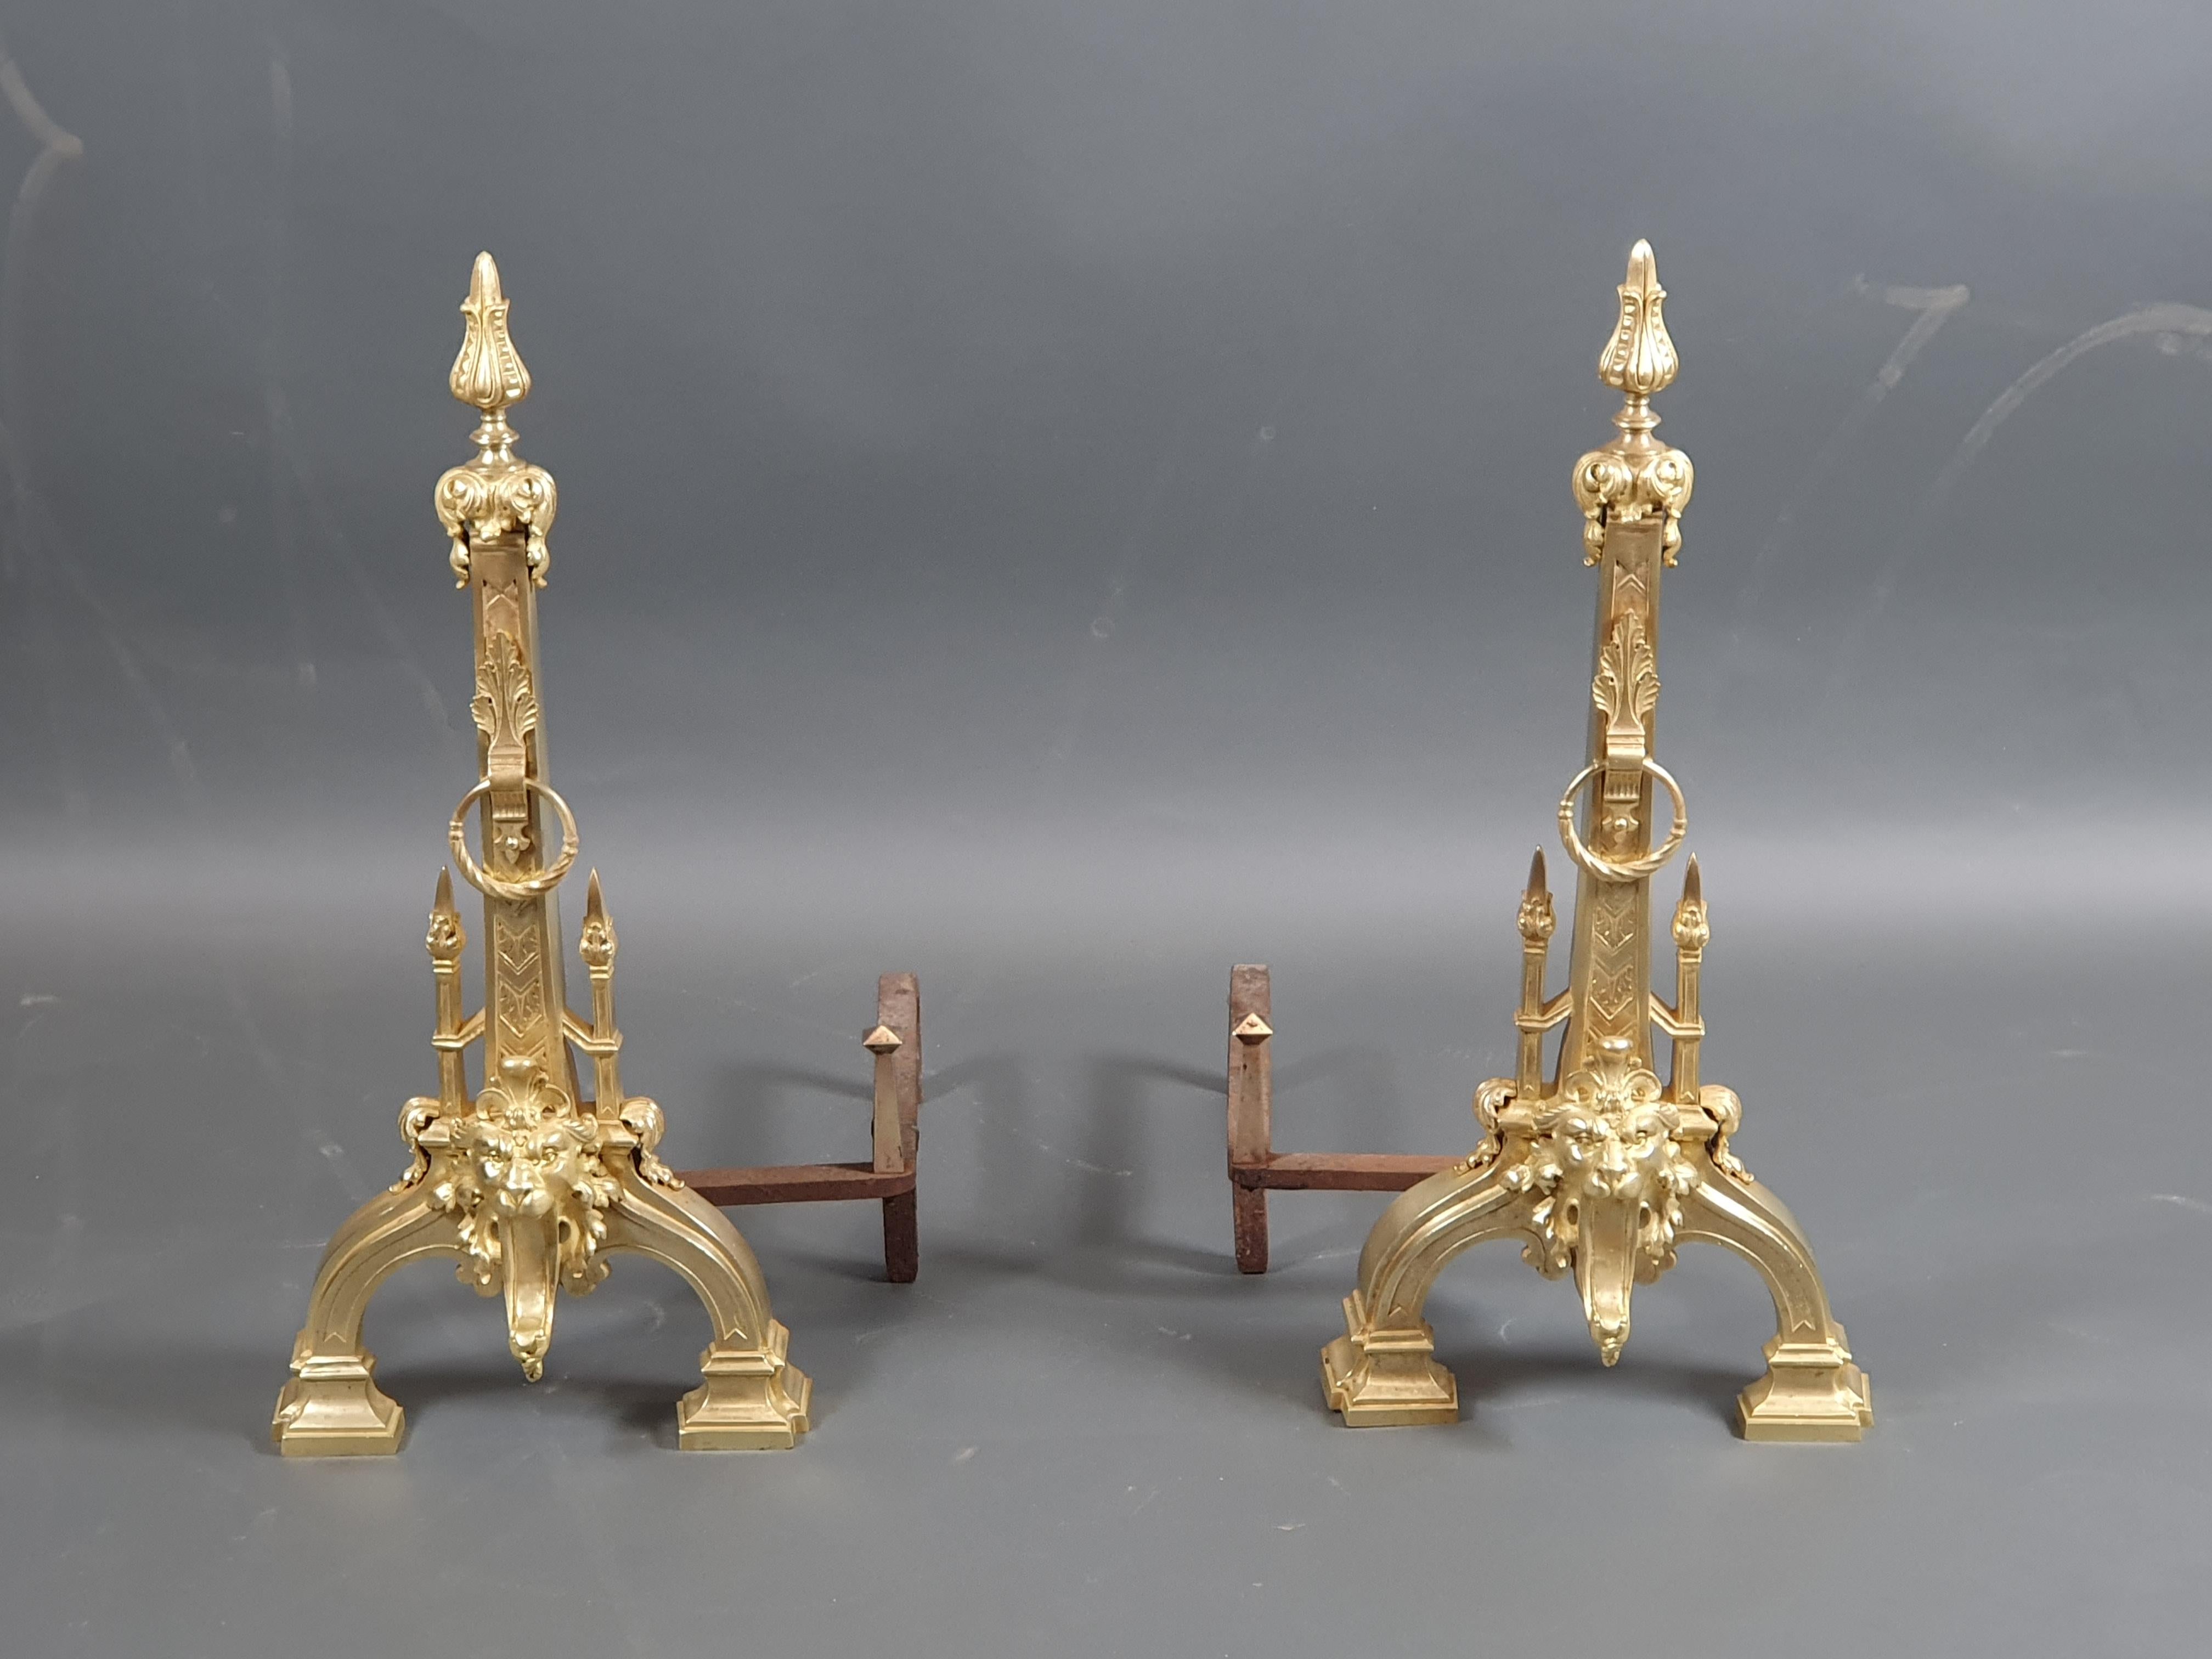 Magnificent pair of cathedral andirons of neo-renaissance inspiration in gilt bronze, adorned with a roaring lion's head surmounted by an obelisk-shaped spire.

The irons are thick and original, they are adorned with a gilded bronze